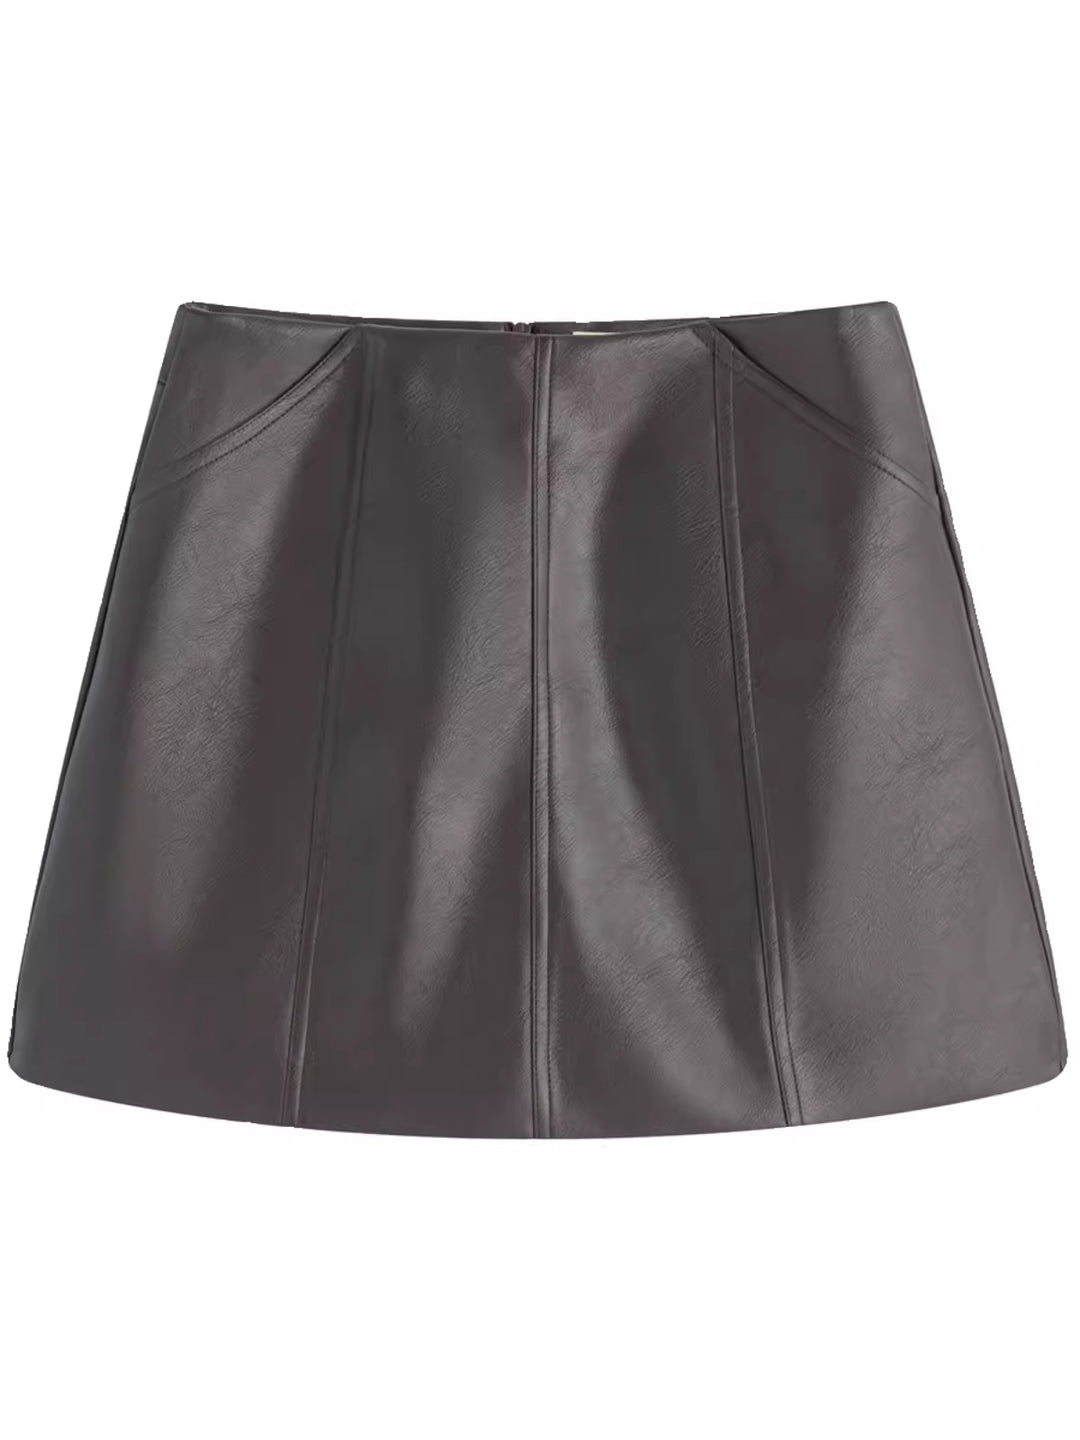 Newly launched imitation leather skirt, high quality solid color slit brown A-line leather skirt